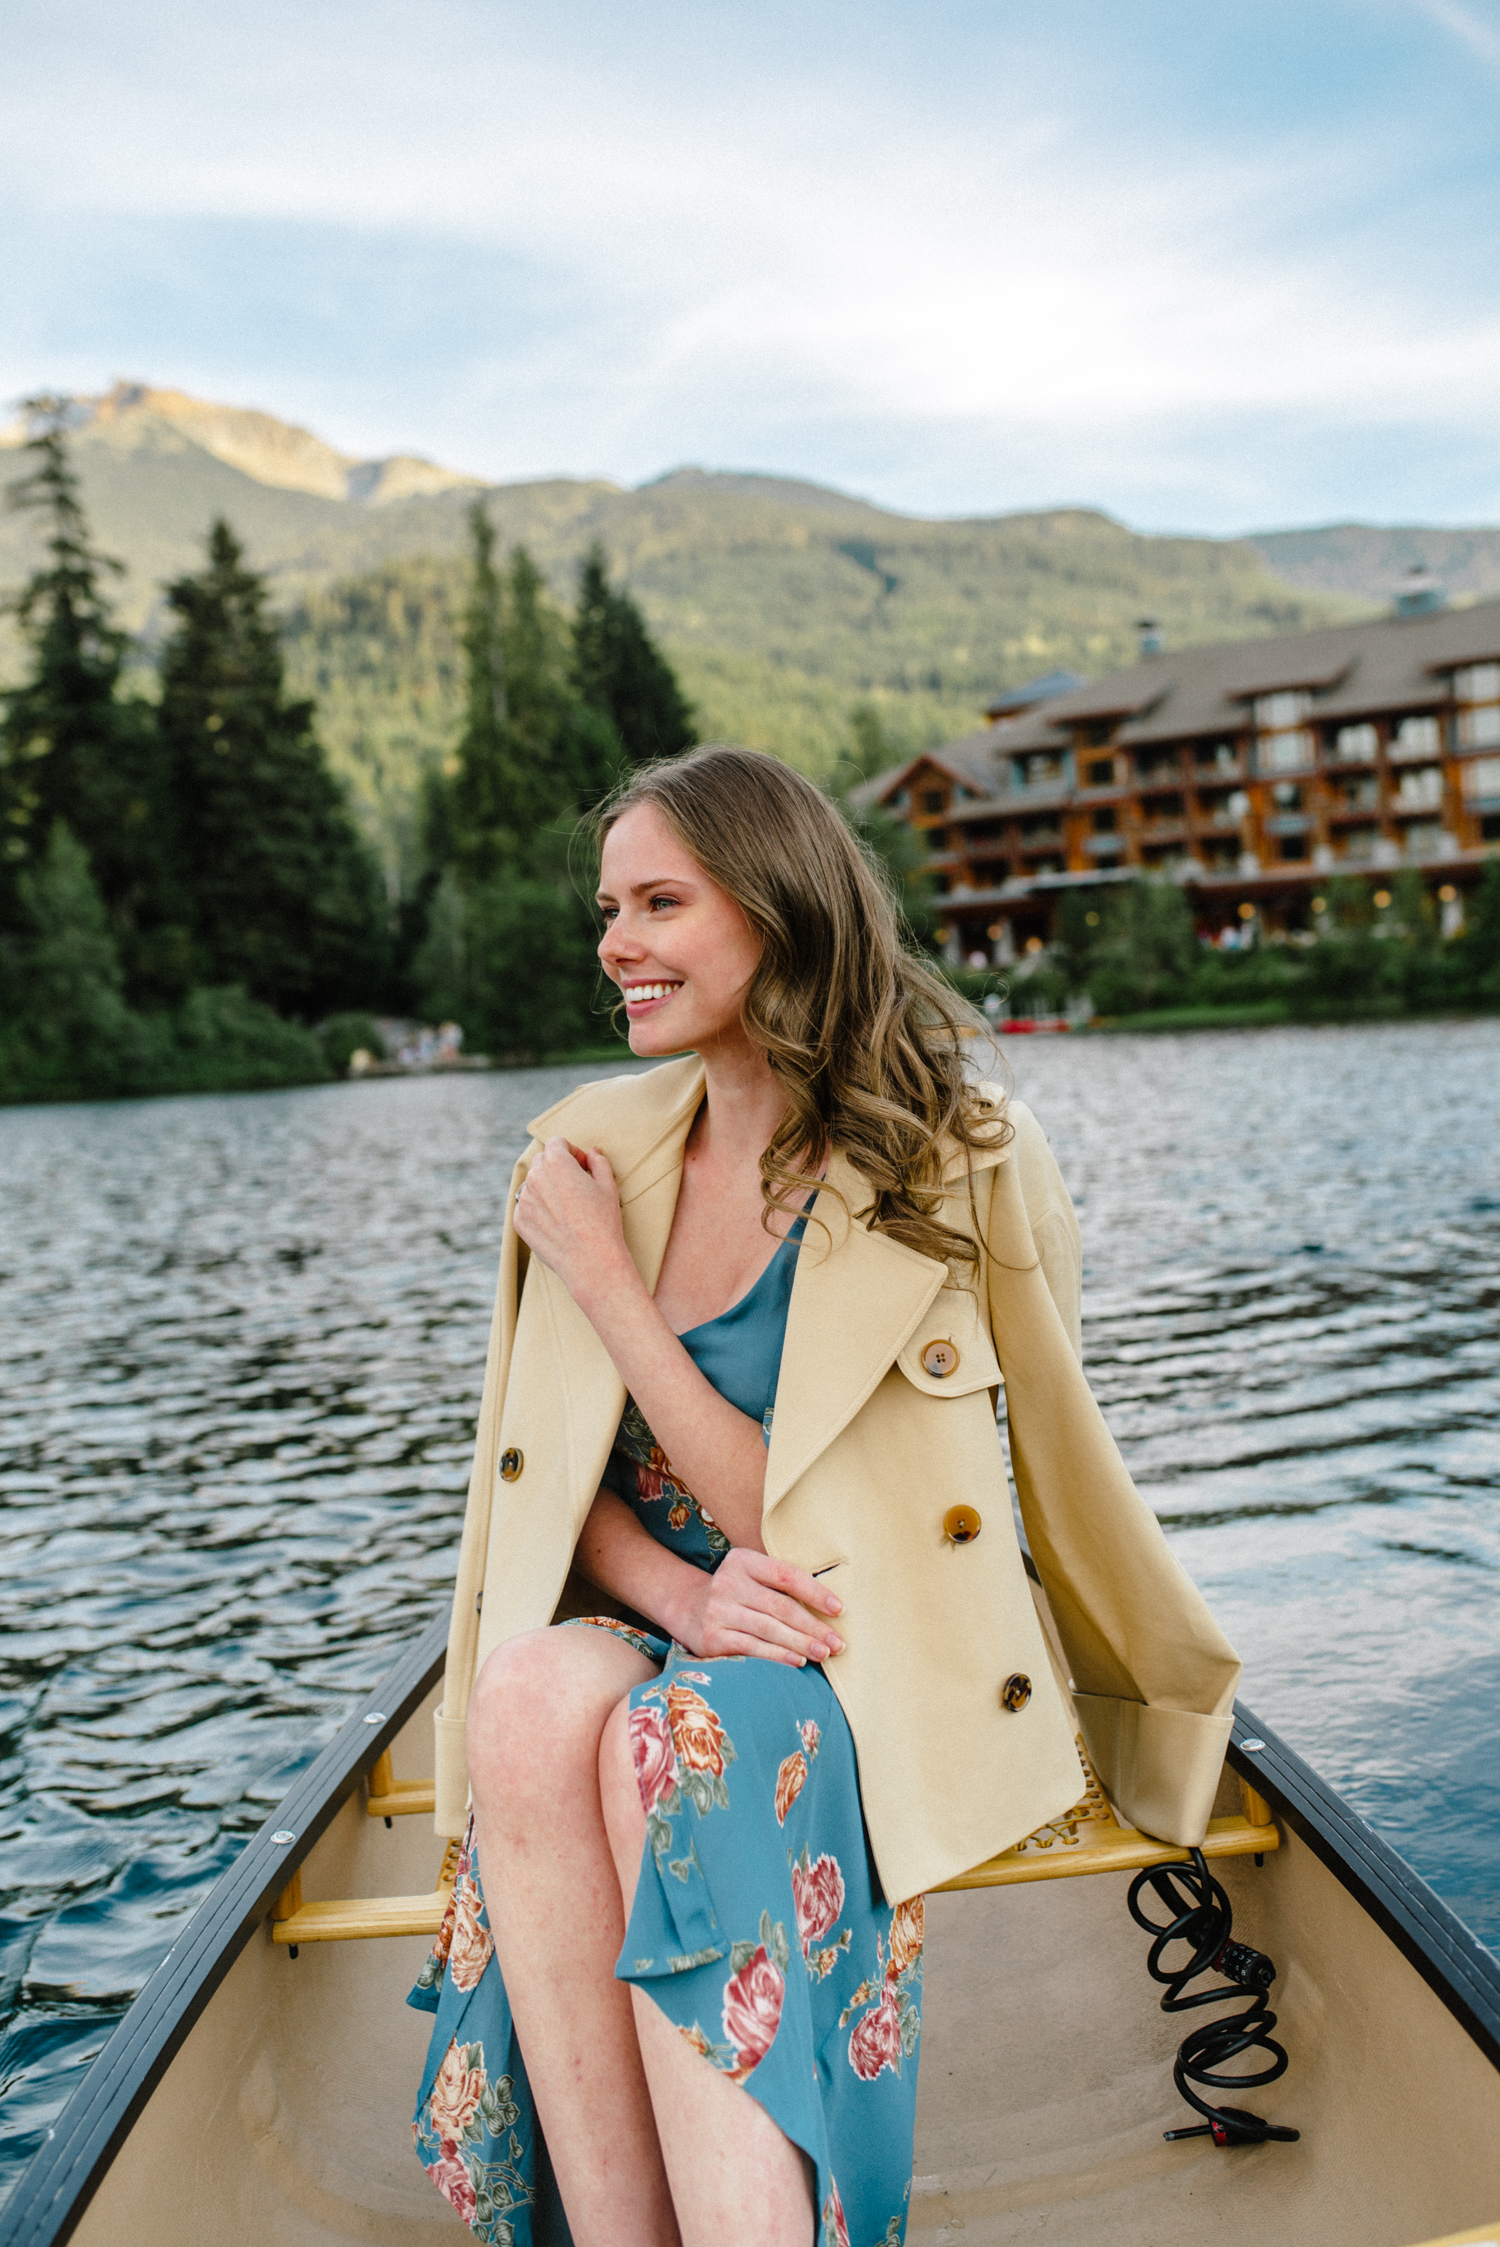 Alyssa Campanella of The A List blog shares her travels of 2018